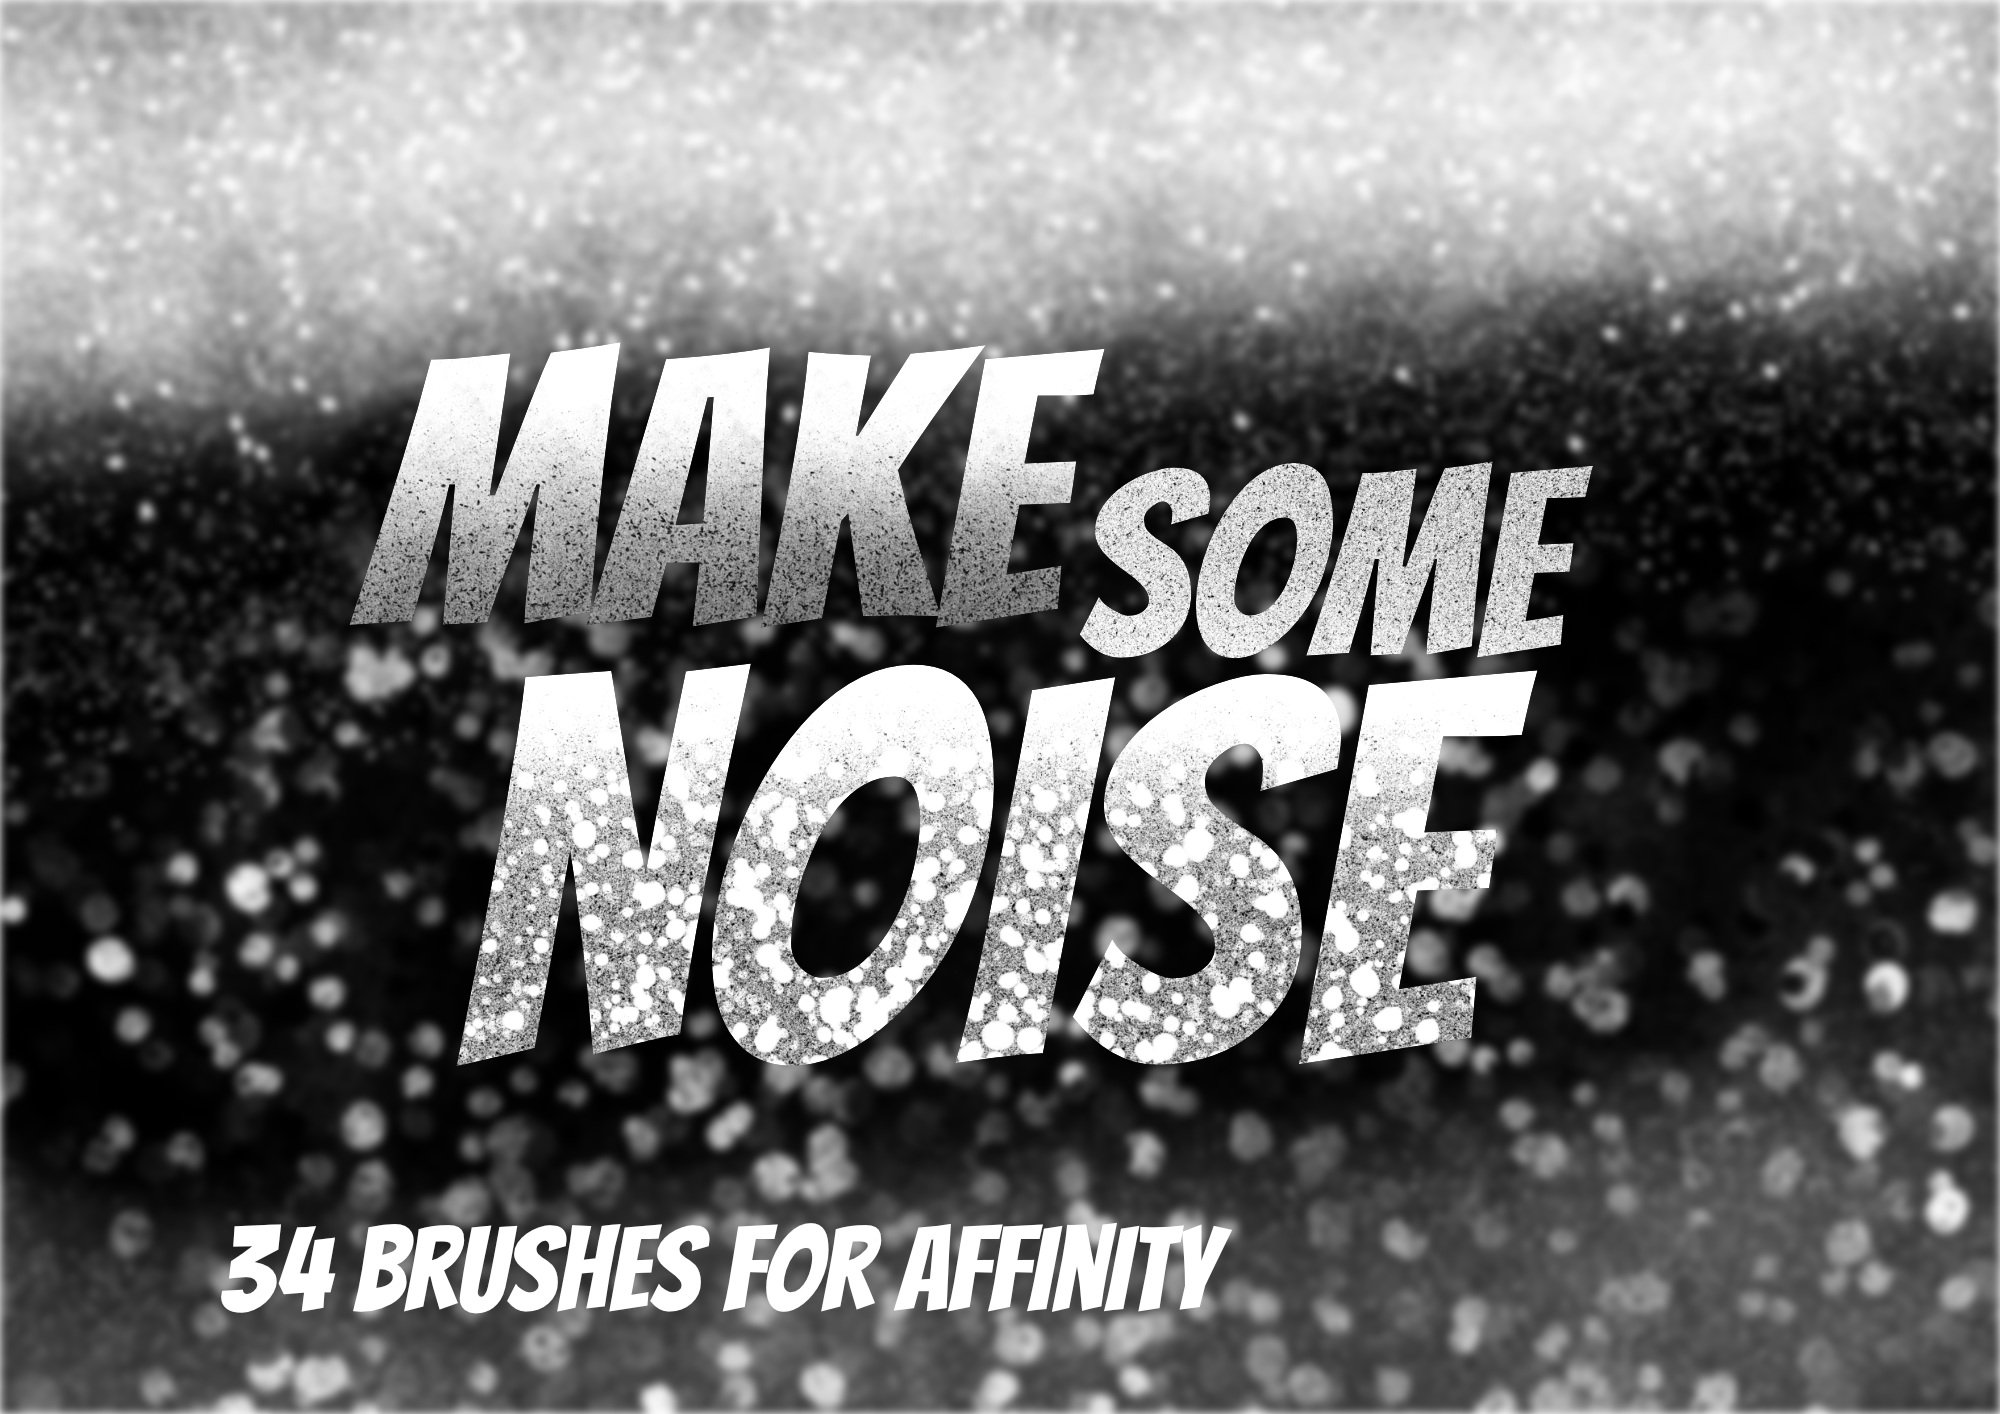 Noise brushes for Affinity Apps cover image.